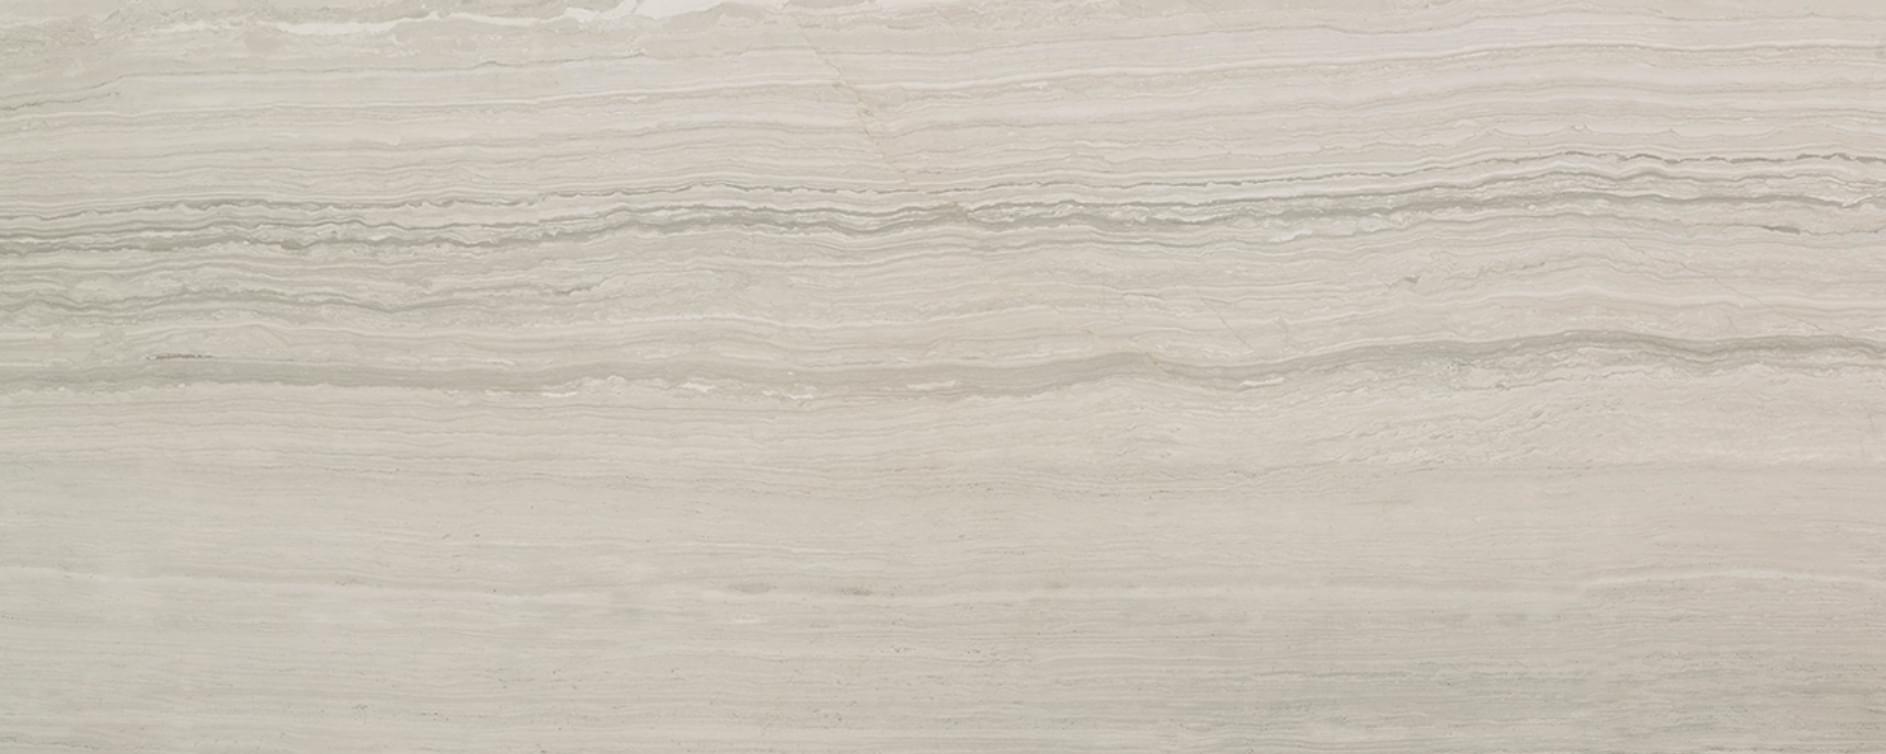 LAntic Colonial Natural Stone Silver Wood Classico Bioprot 7.5x30